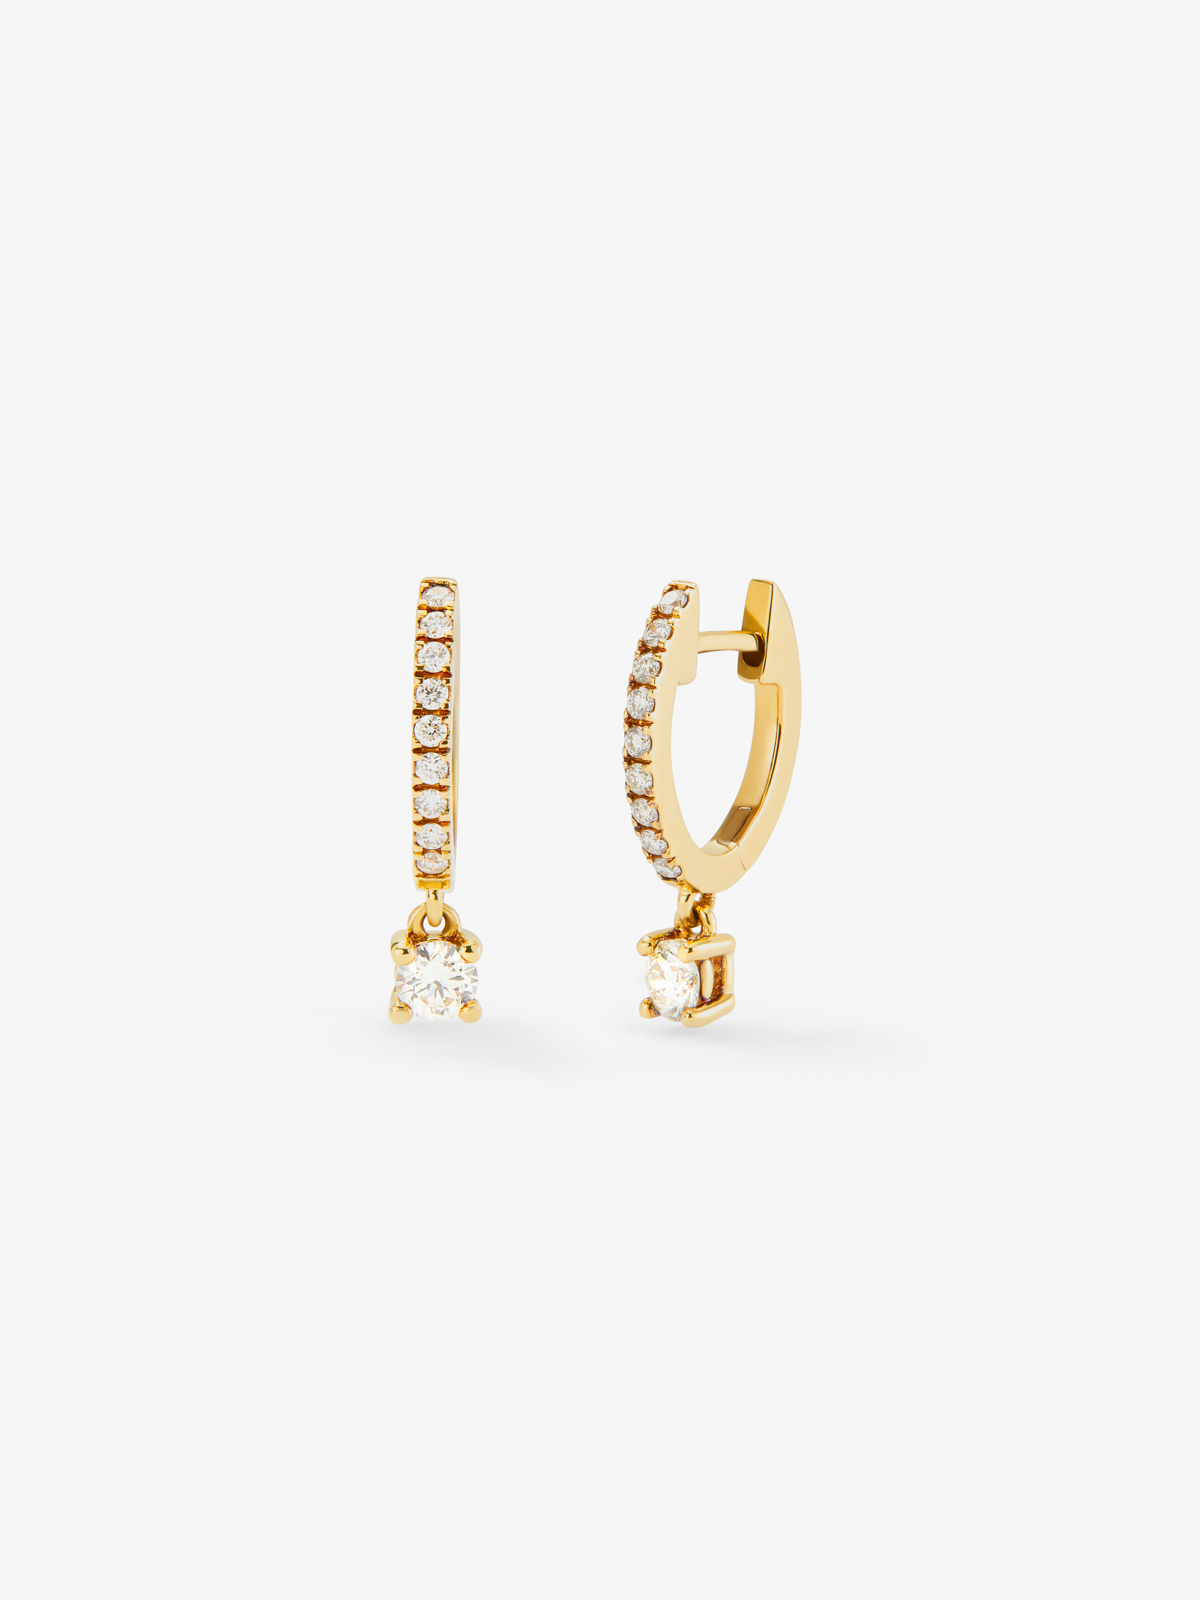 18K yellow gold earrings with white diamonds of 0.41 cts